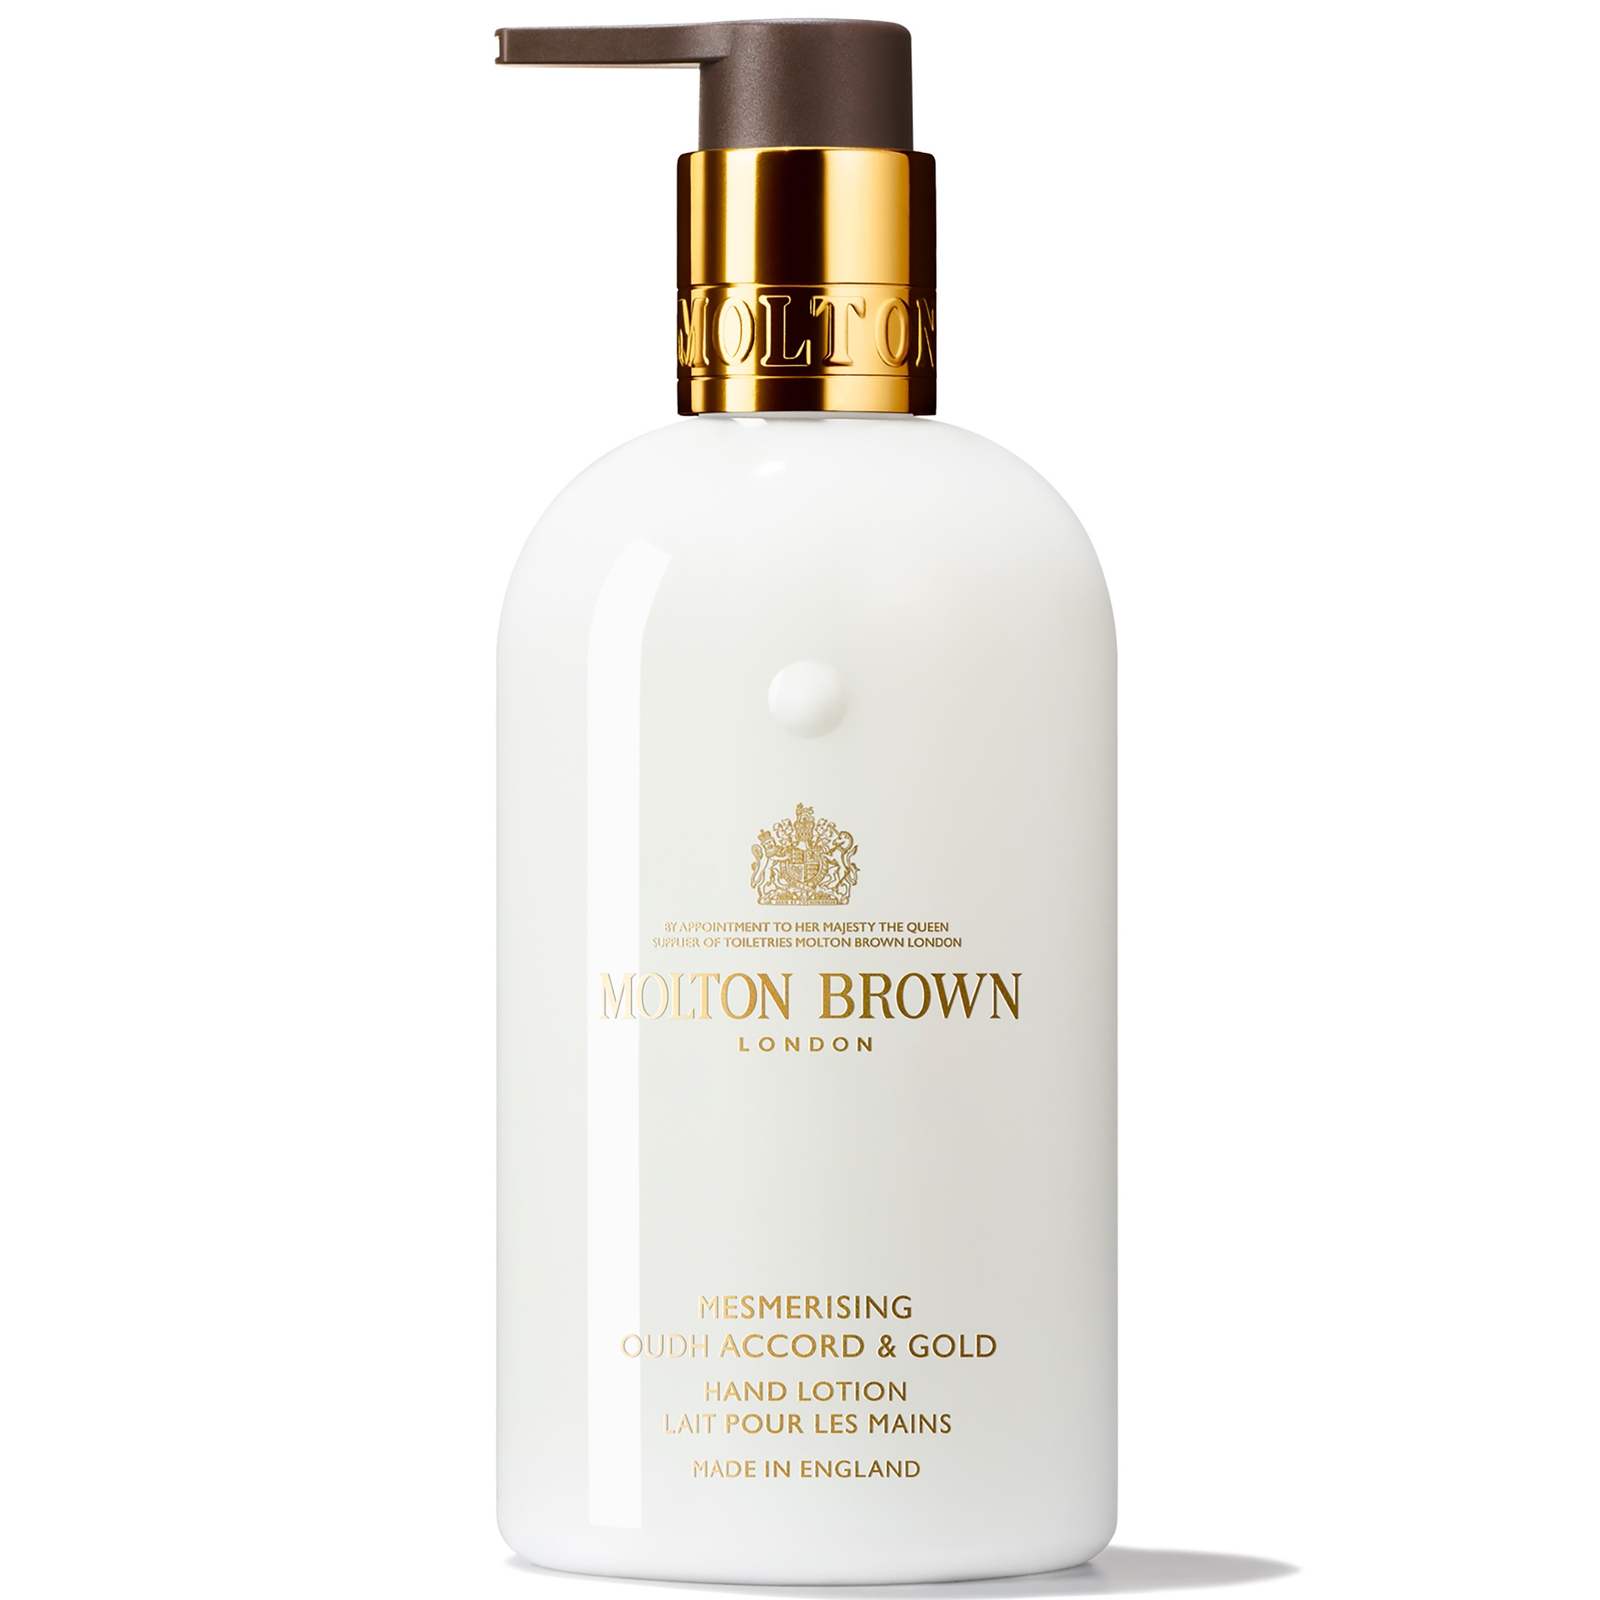 Molton Brown Mesmerising Oudh Accord and Gold Hand Lotion 300ml